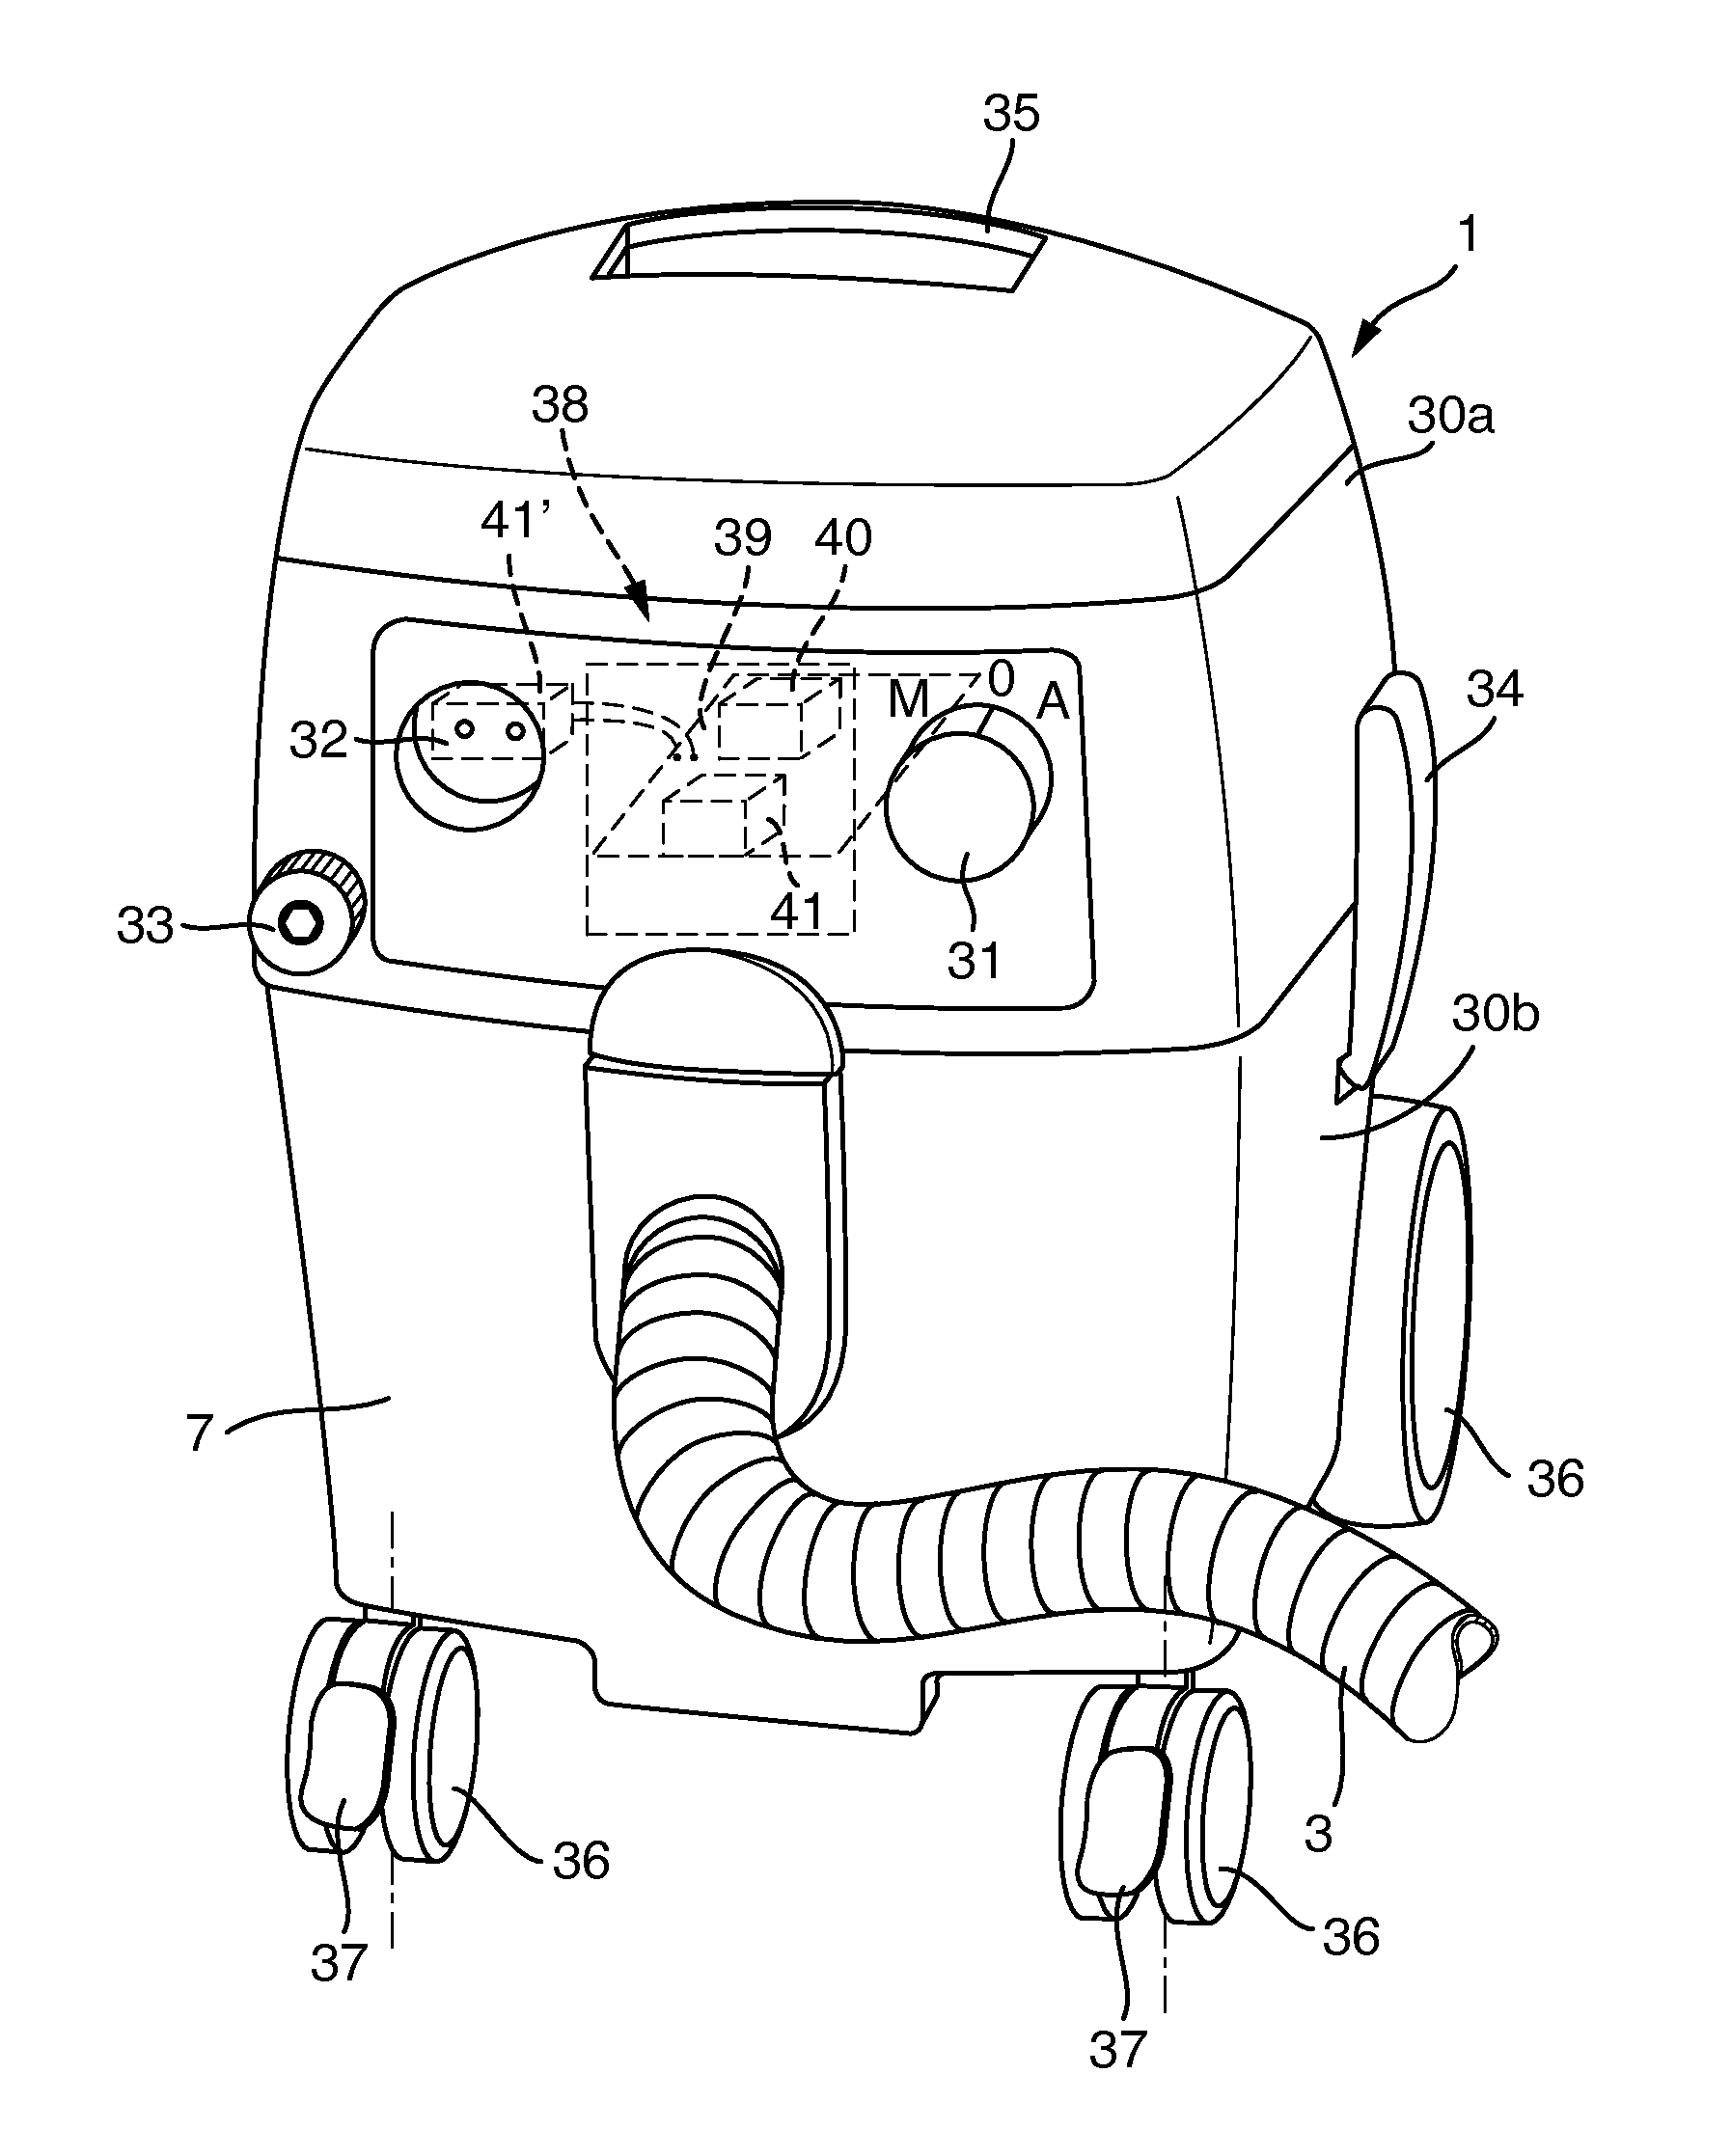 Vacuum cleaner pneumatically connected to a power tool, method for controlling operation parameters of such a vacuum cleaner and power tool for pneumatic connection to such a vacuum cleaner